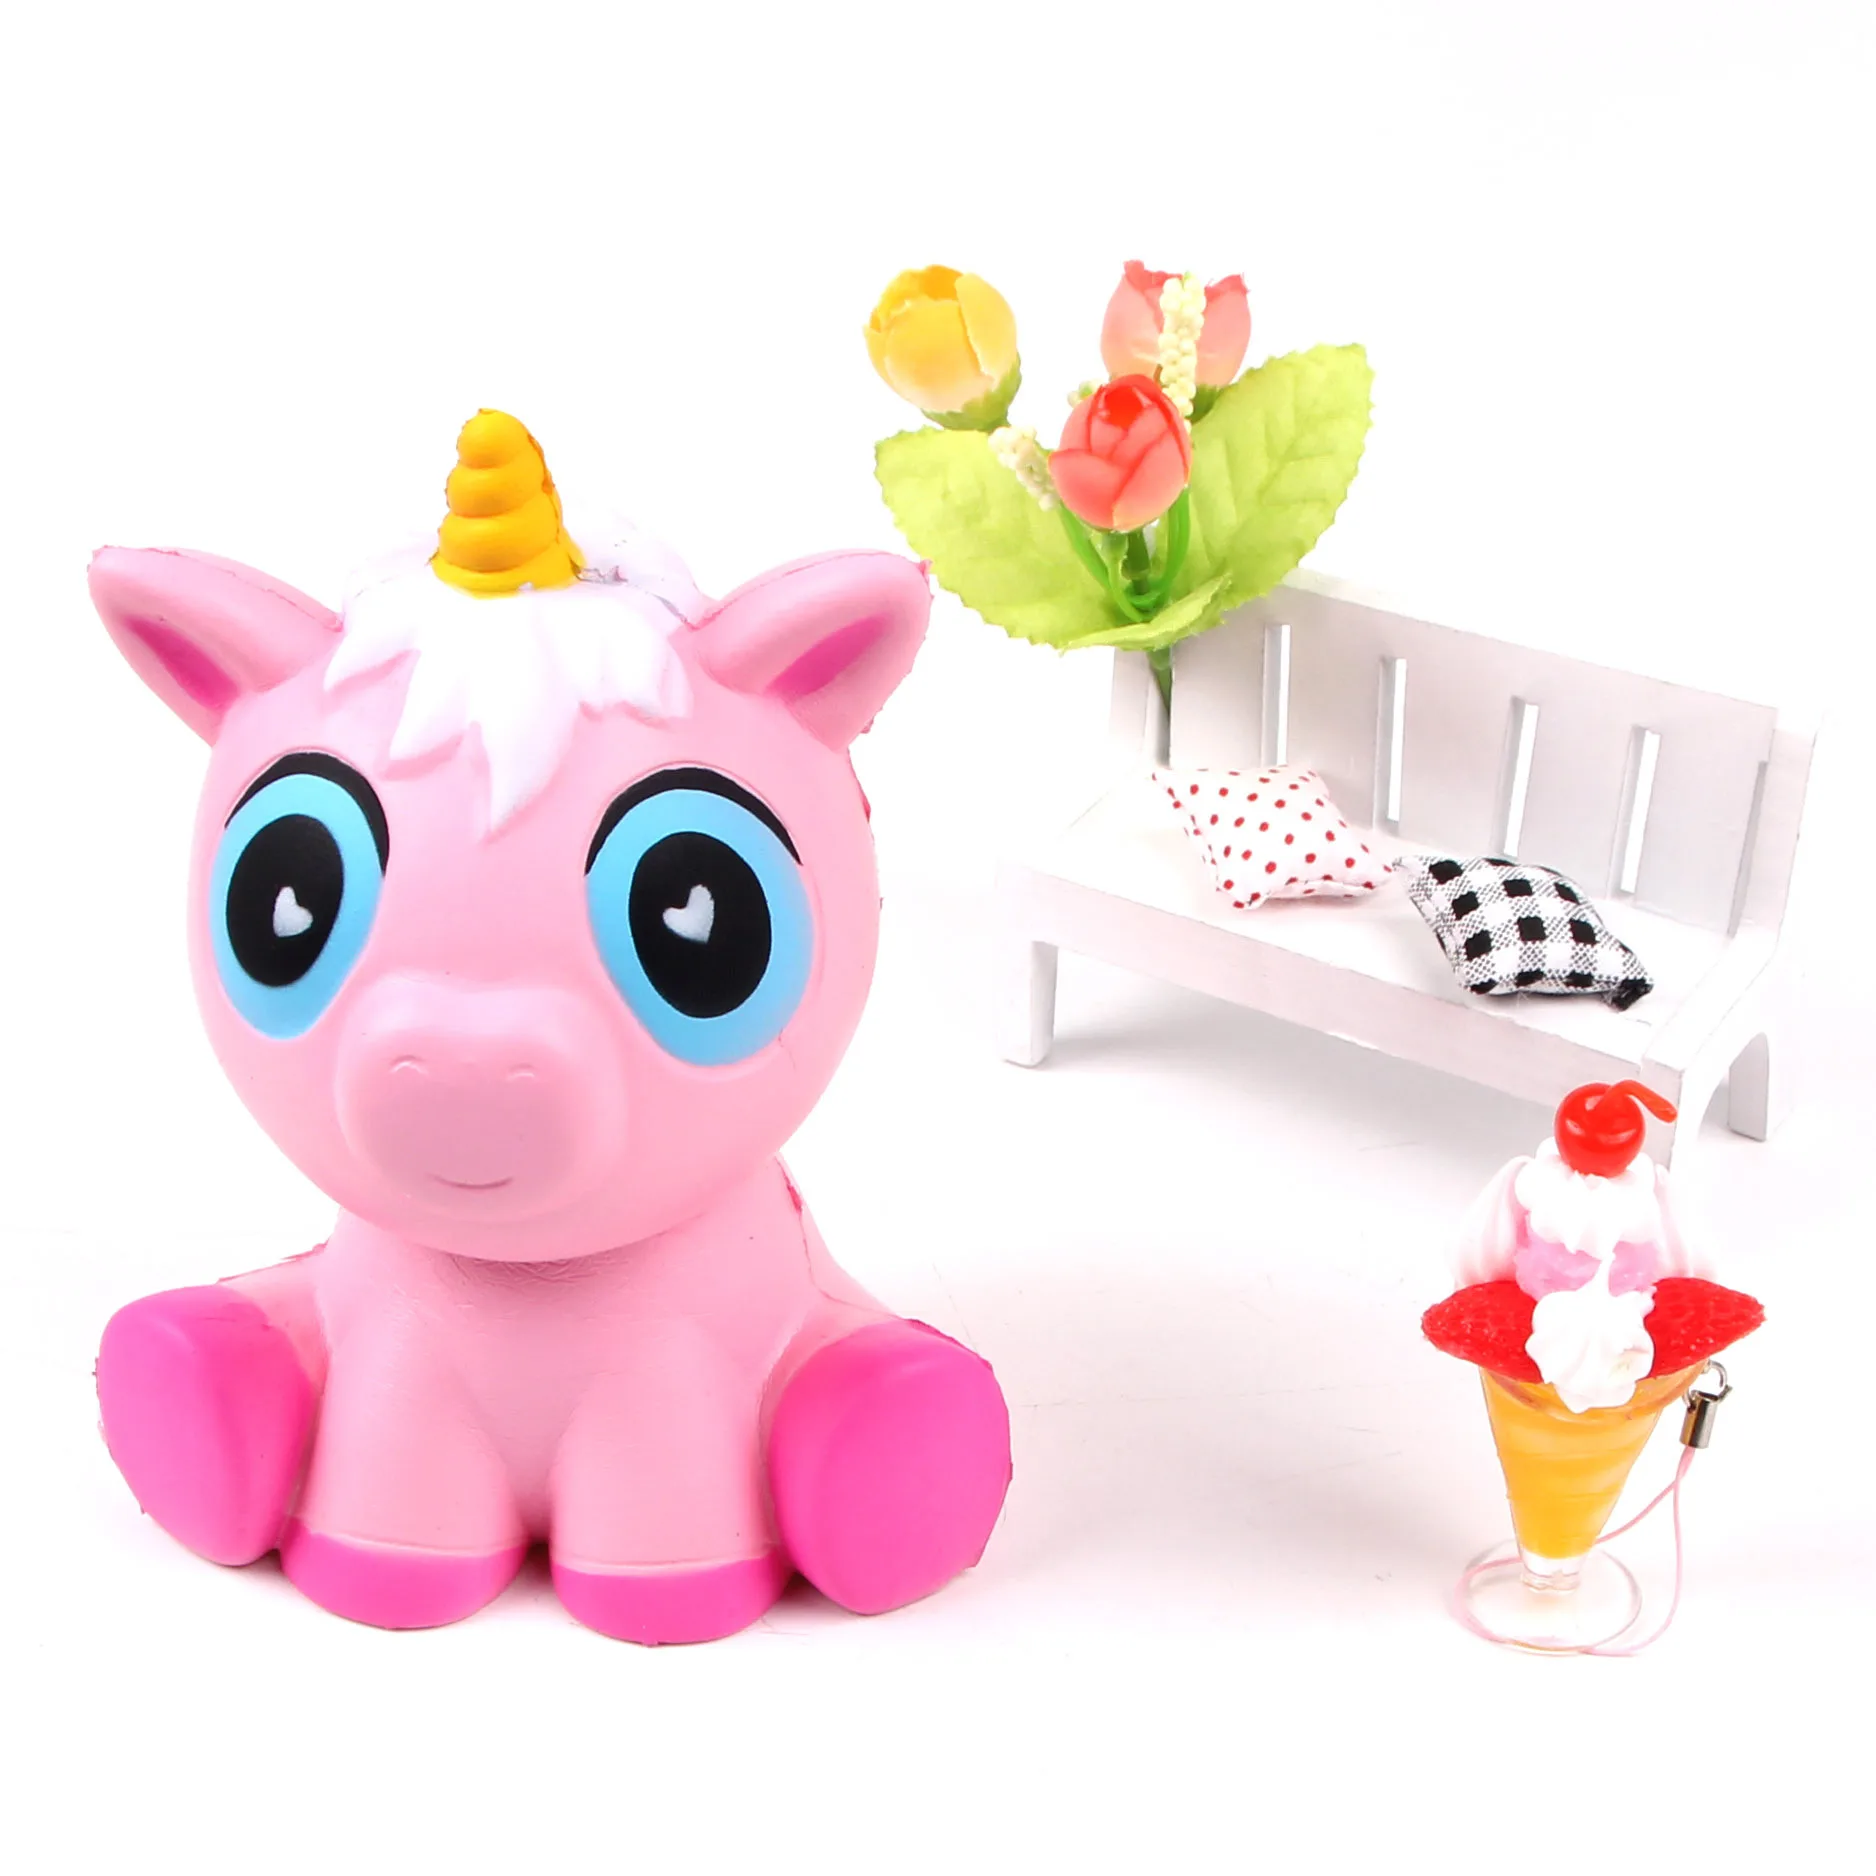 

Soft Slow Rising Squishy Kids Cute Lovely Jumbo Big Pink Unicorn Cartoon Animal Squishy Toys With Good Smell Scented